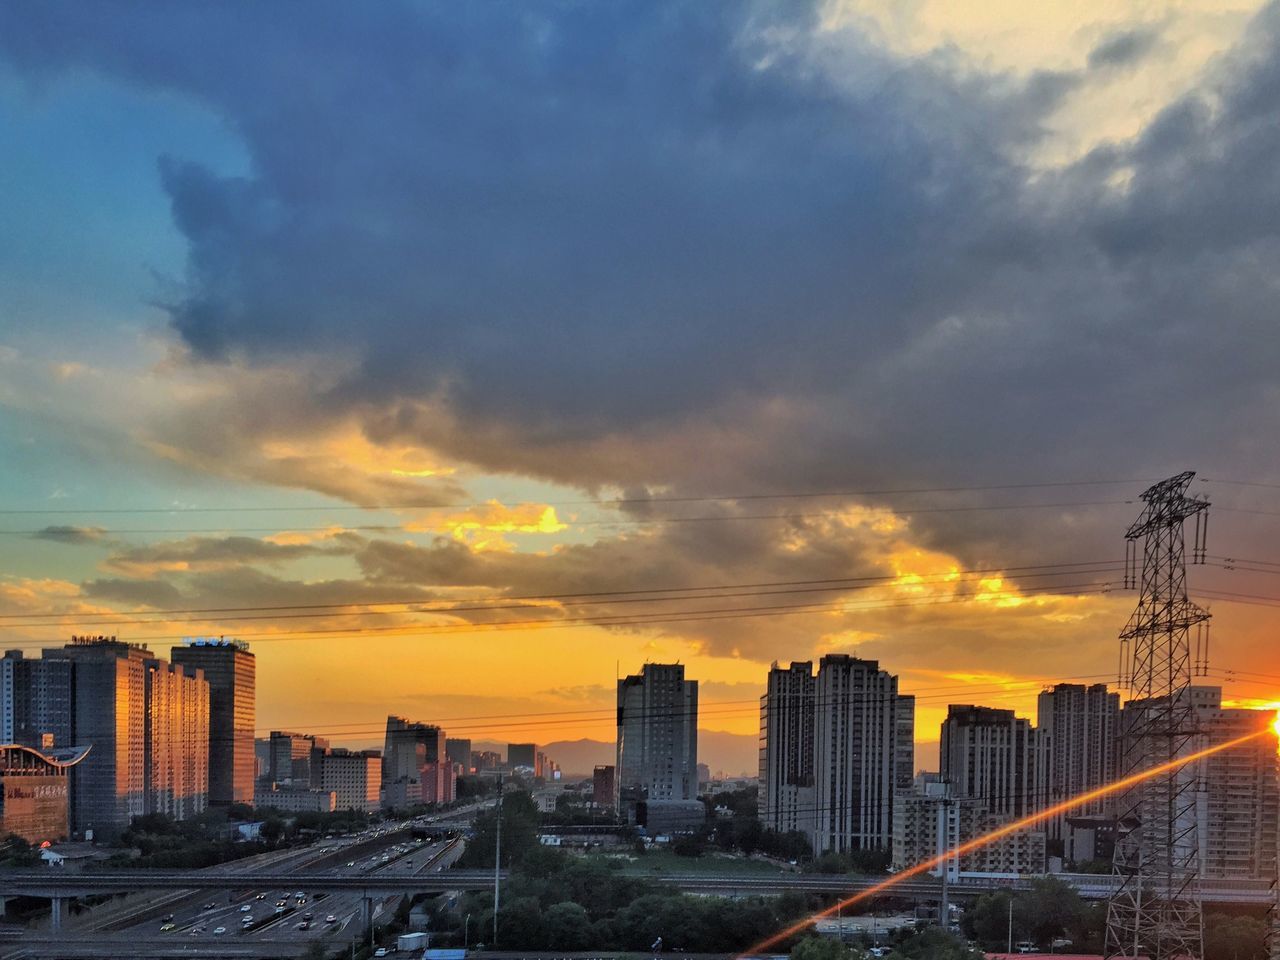 sunset, city, building exterior, architecture, built structure, cityscape, sky, skyscraper, orange color, cloud - sky, modern, tall - high, tower, office building, urban skyline, city life, cloud, cloudy, residential building, no people